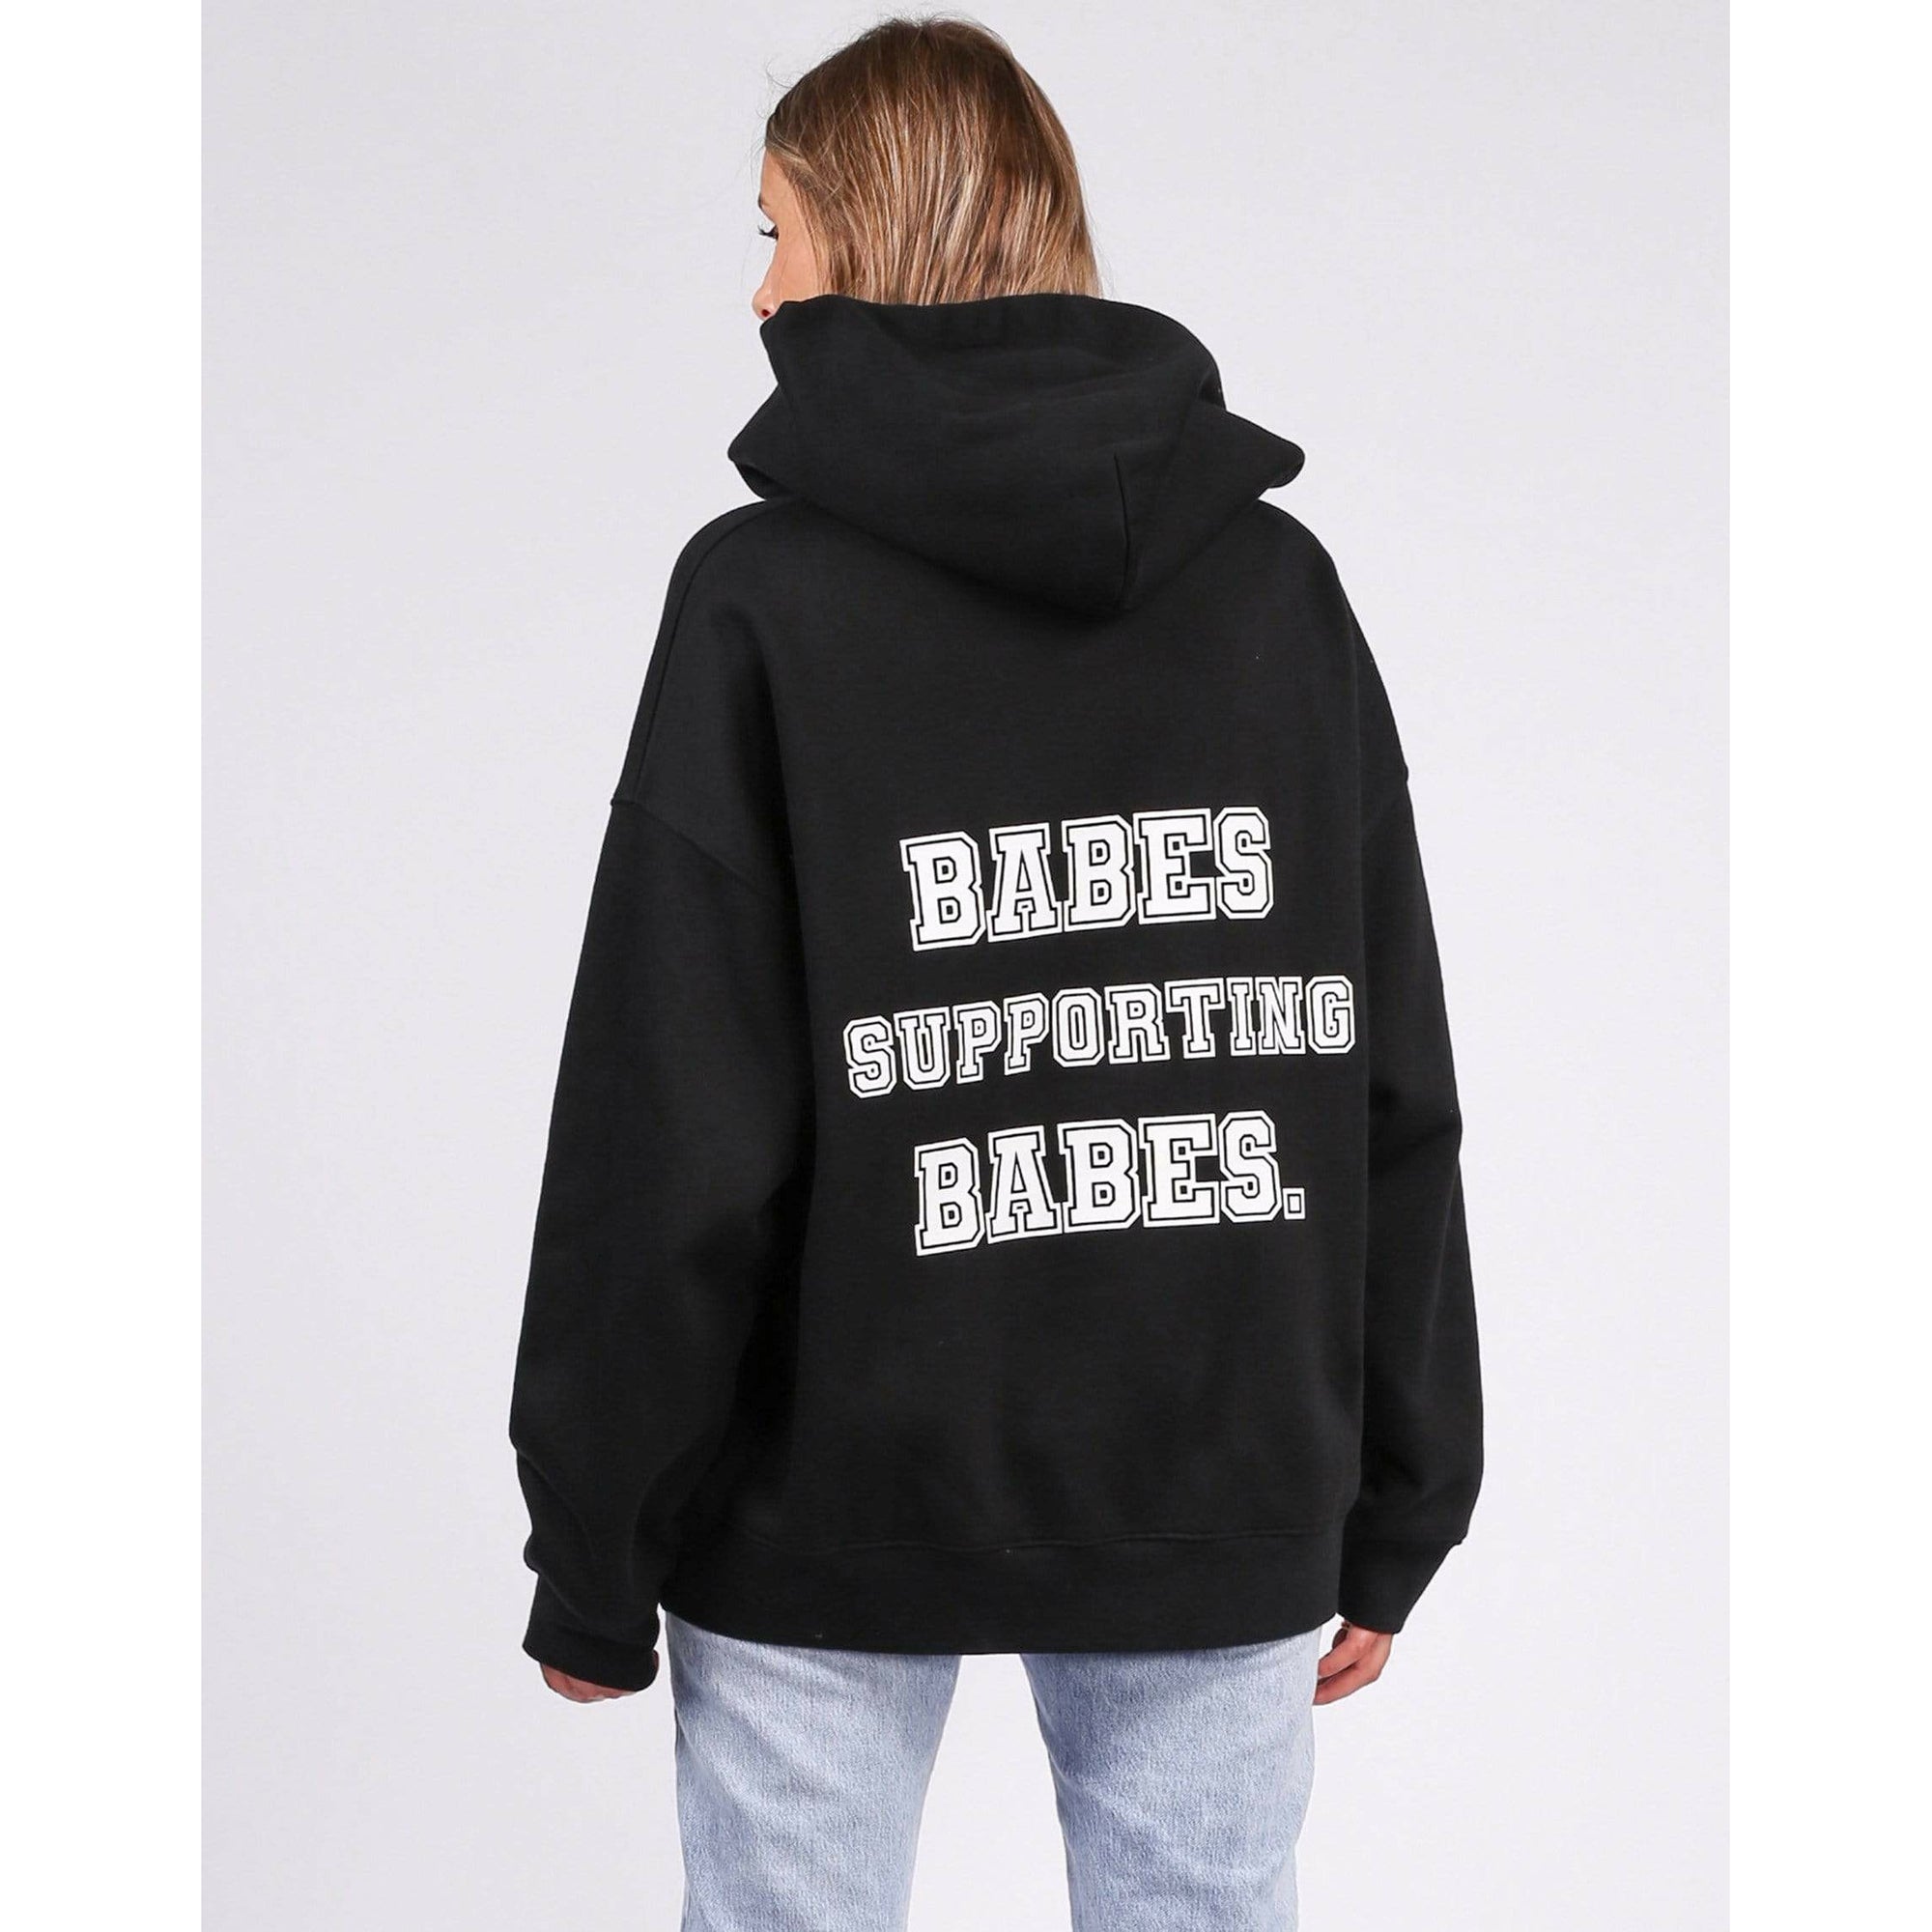 Brunette the Label Black / XS-S Brunette the Label Babes Supporting Babes Hoodie Black